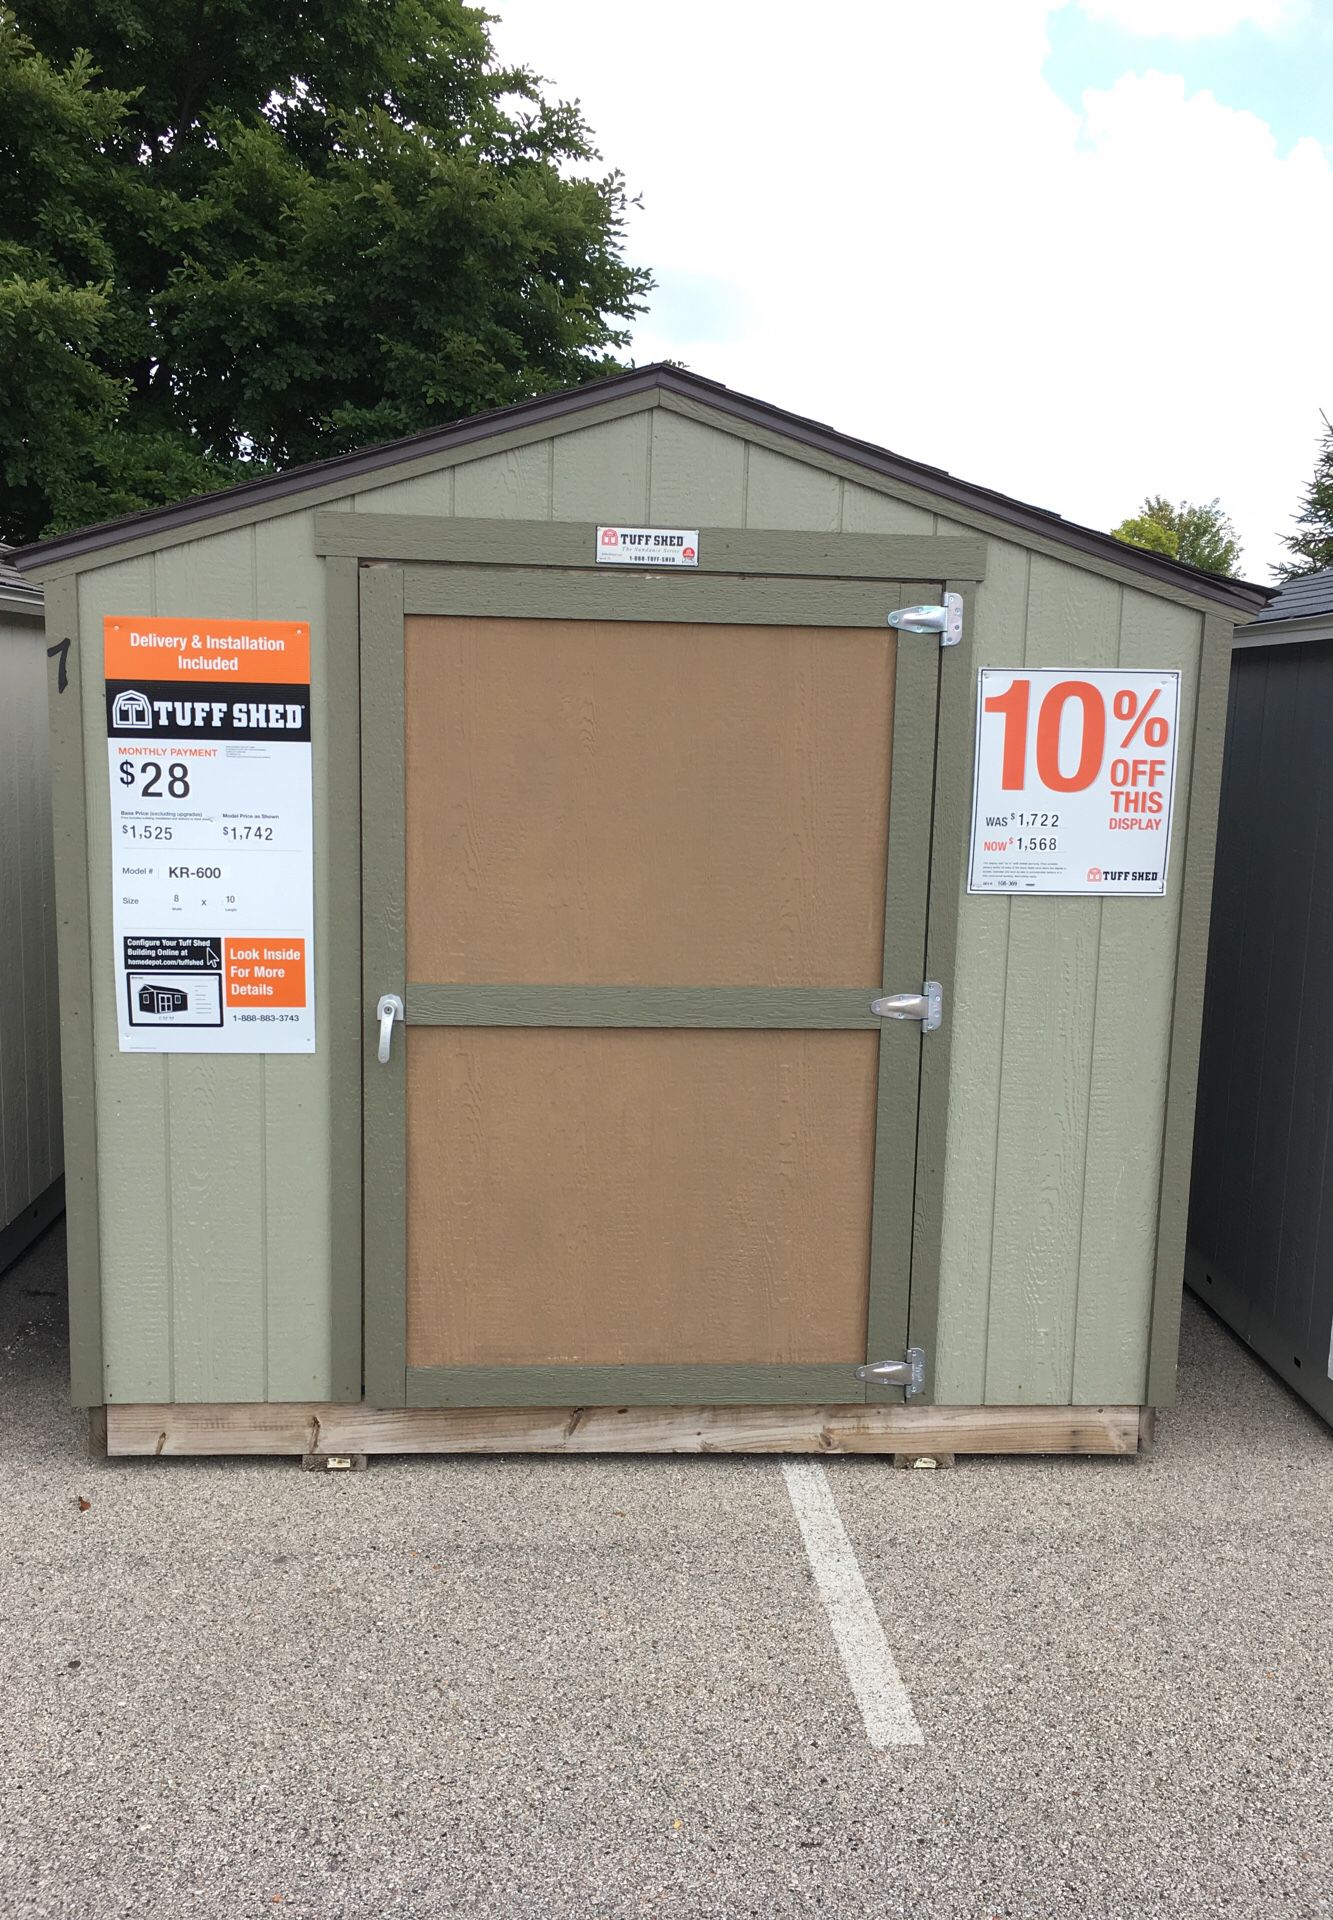 Tuff Shed KR-600 8x10 Was $1,722 Now $1,568